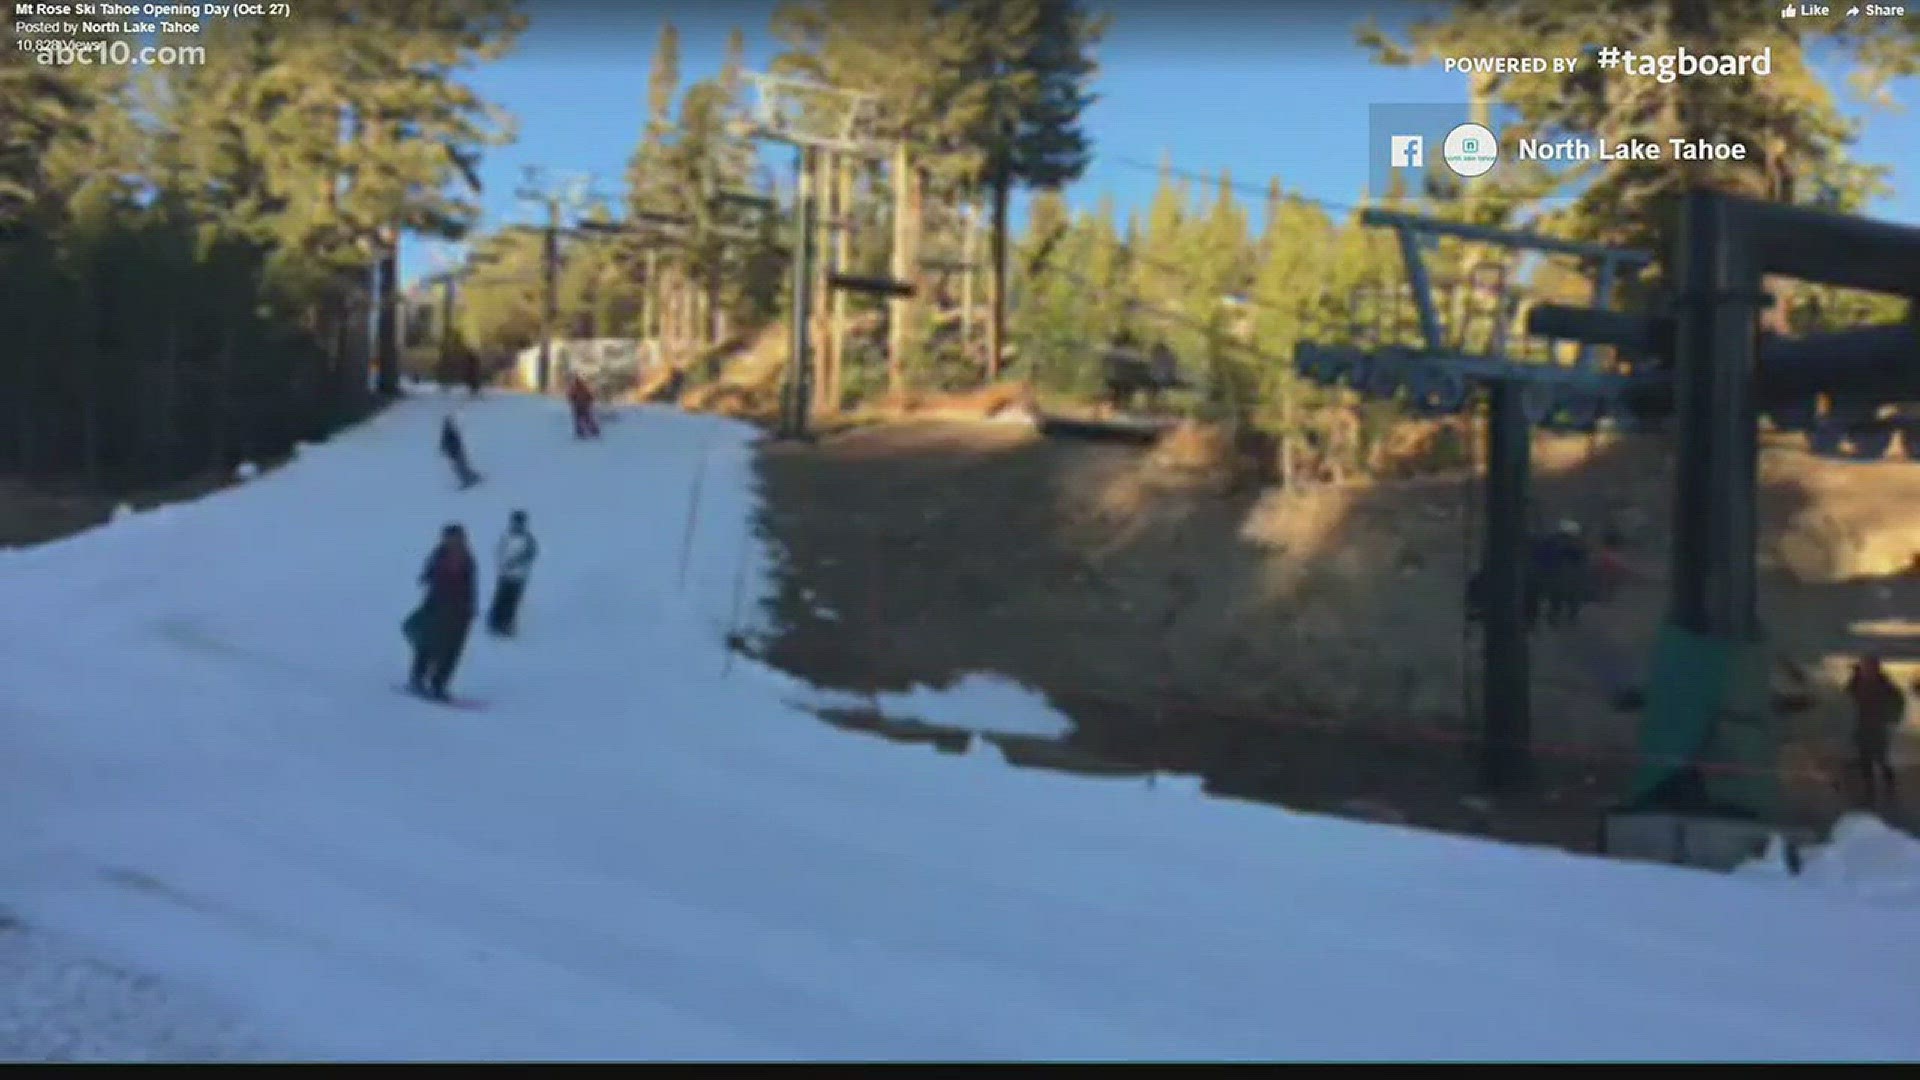 'Tis the season for snow and ski resorts are gearing up for visitors to hit the slopes.